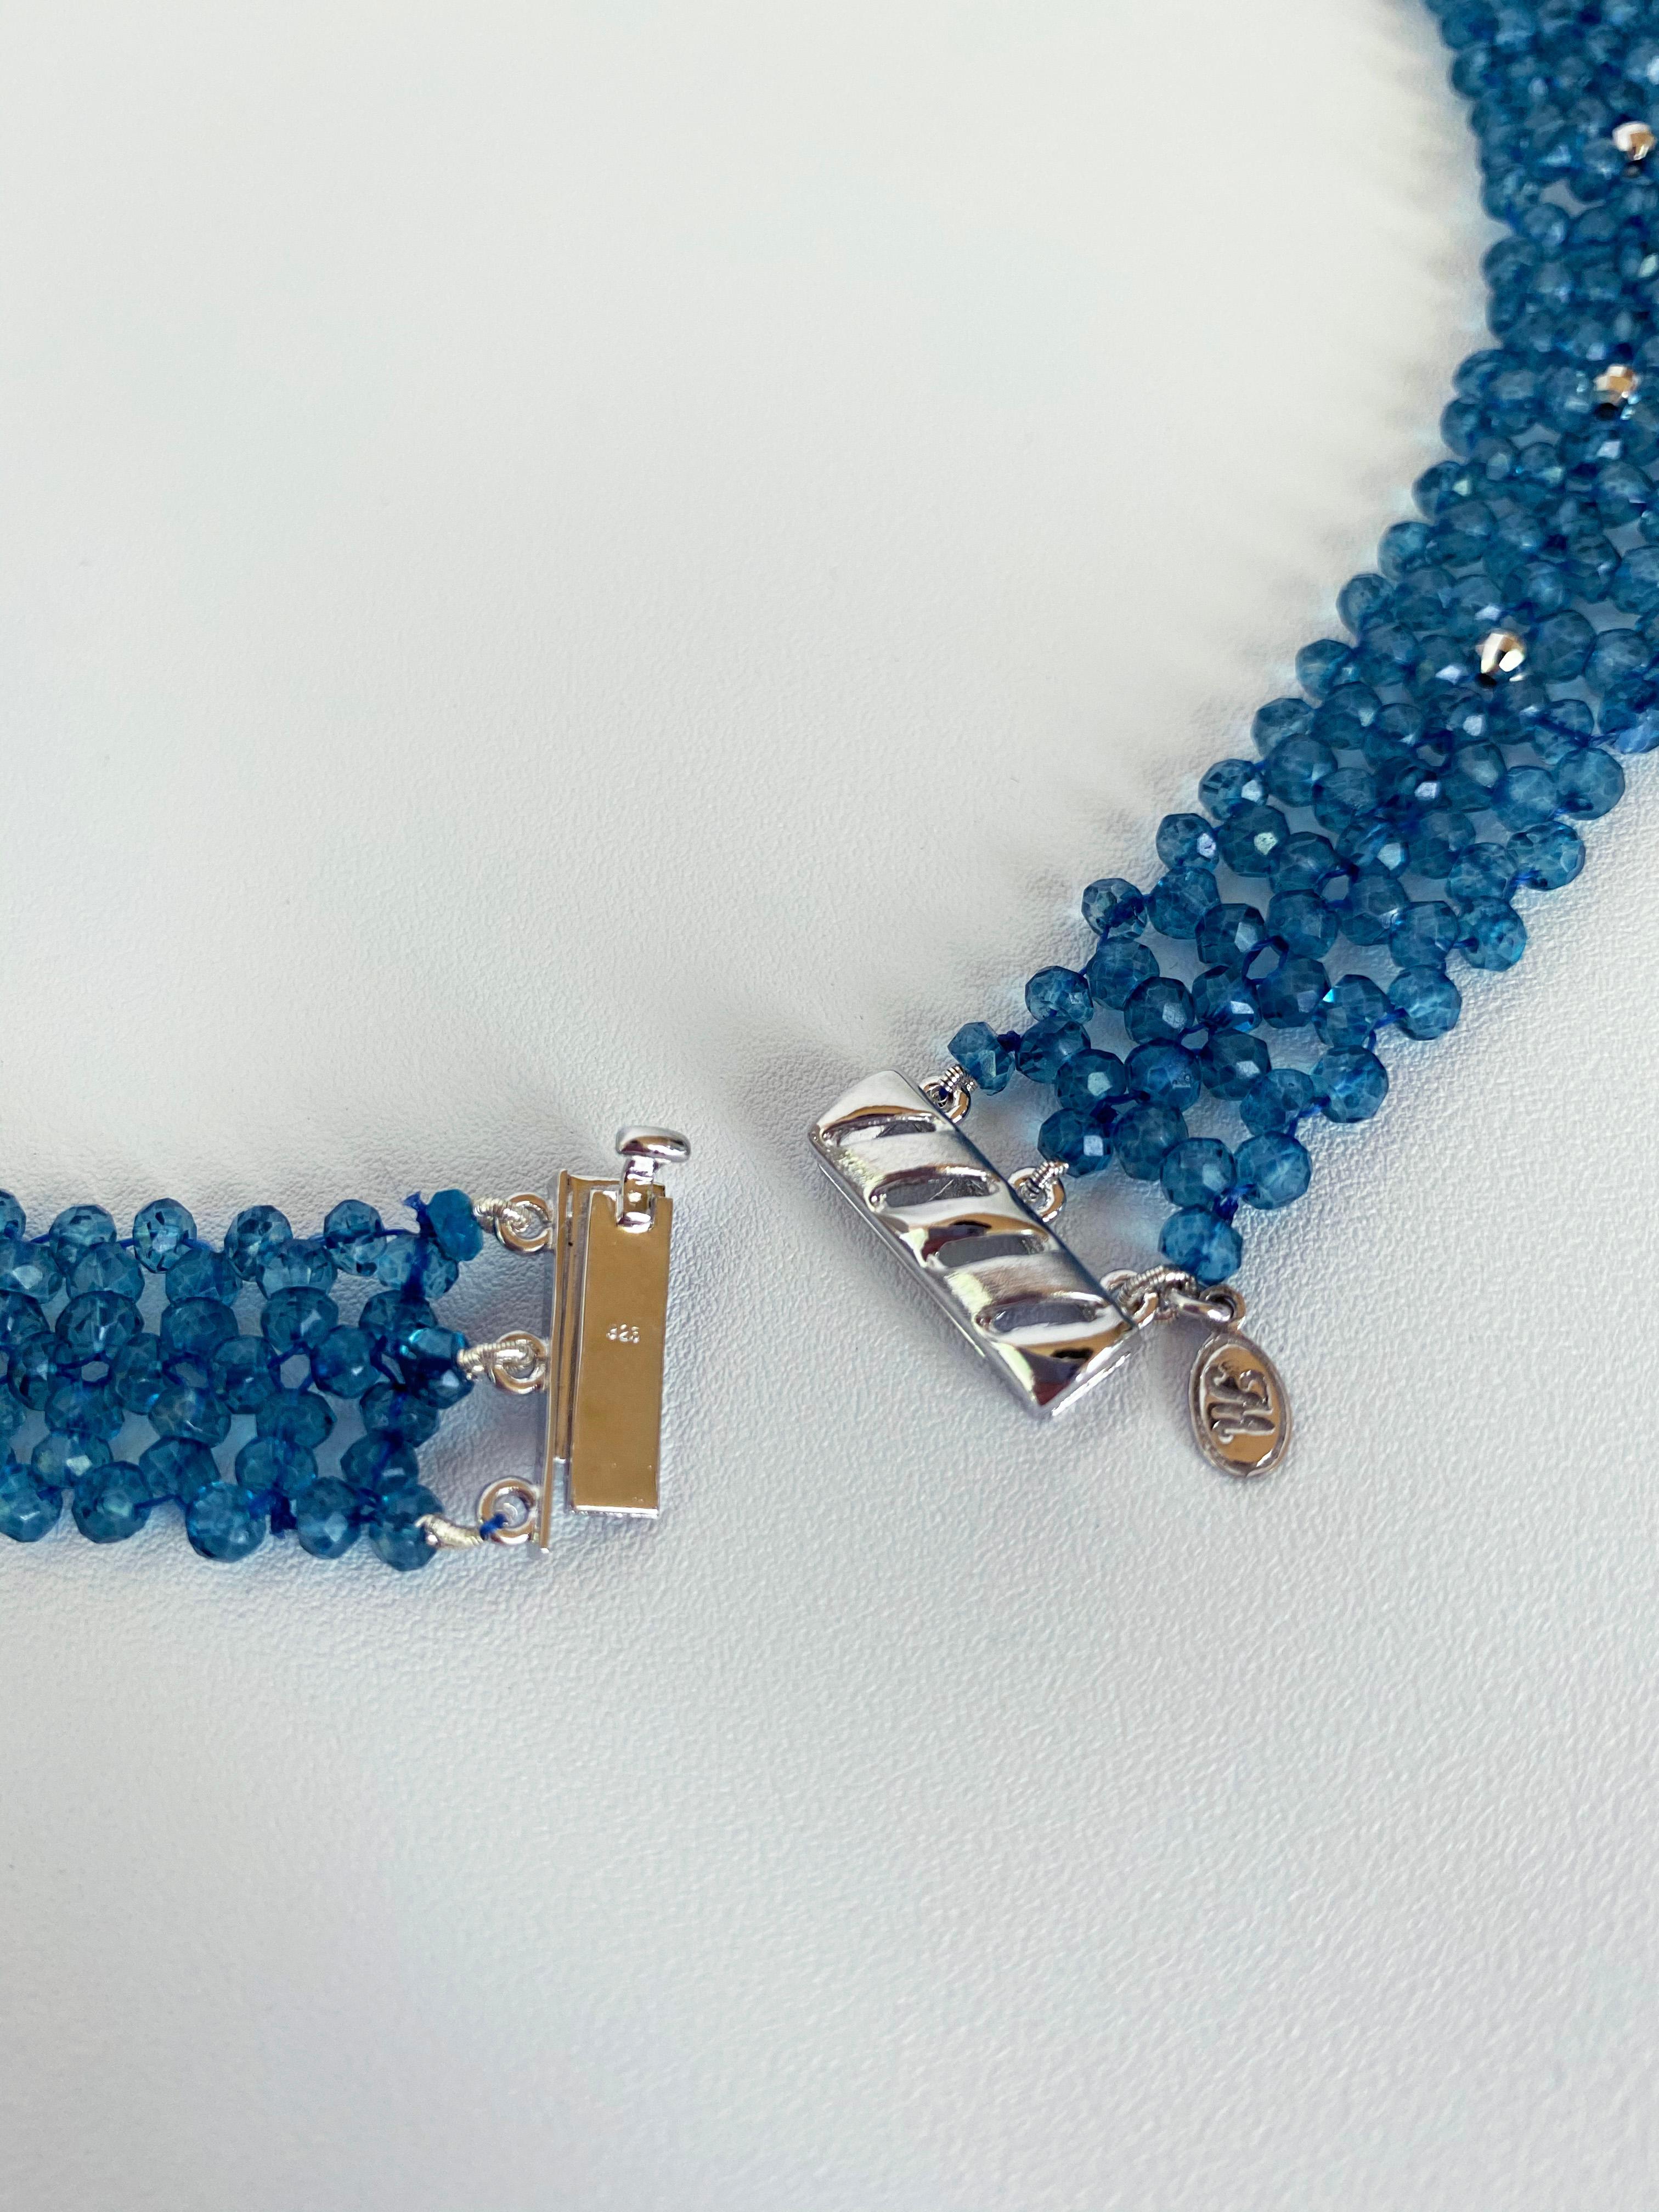 Artisan Marina J Woven London Blue Topaz beaded necklace with faceted Briollettes 